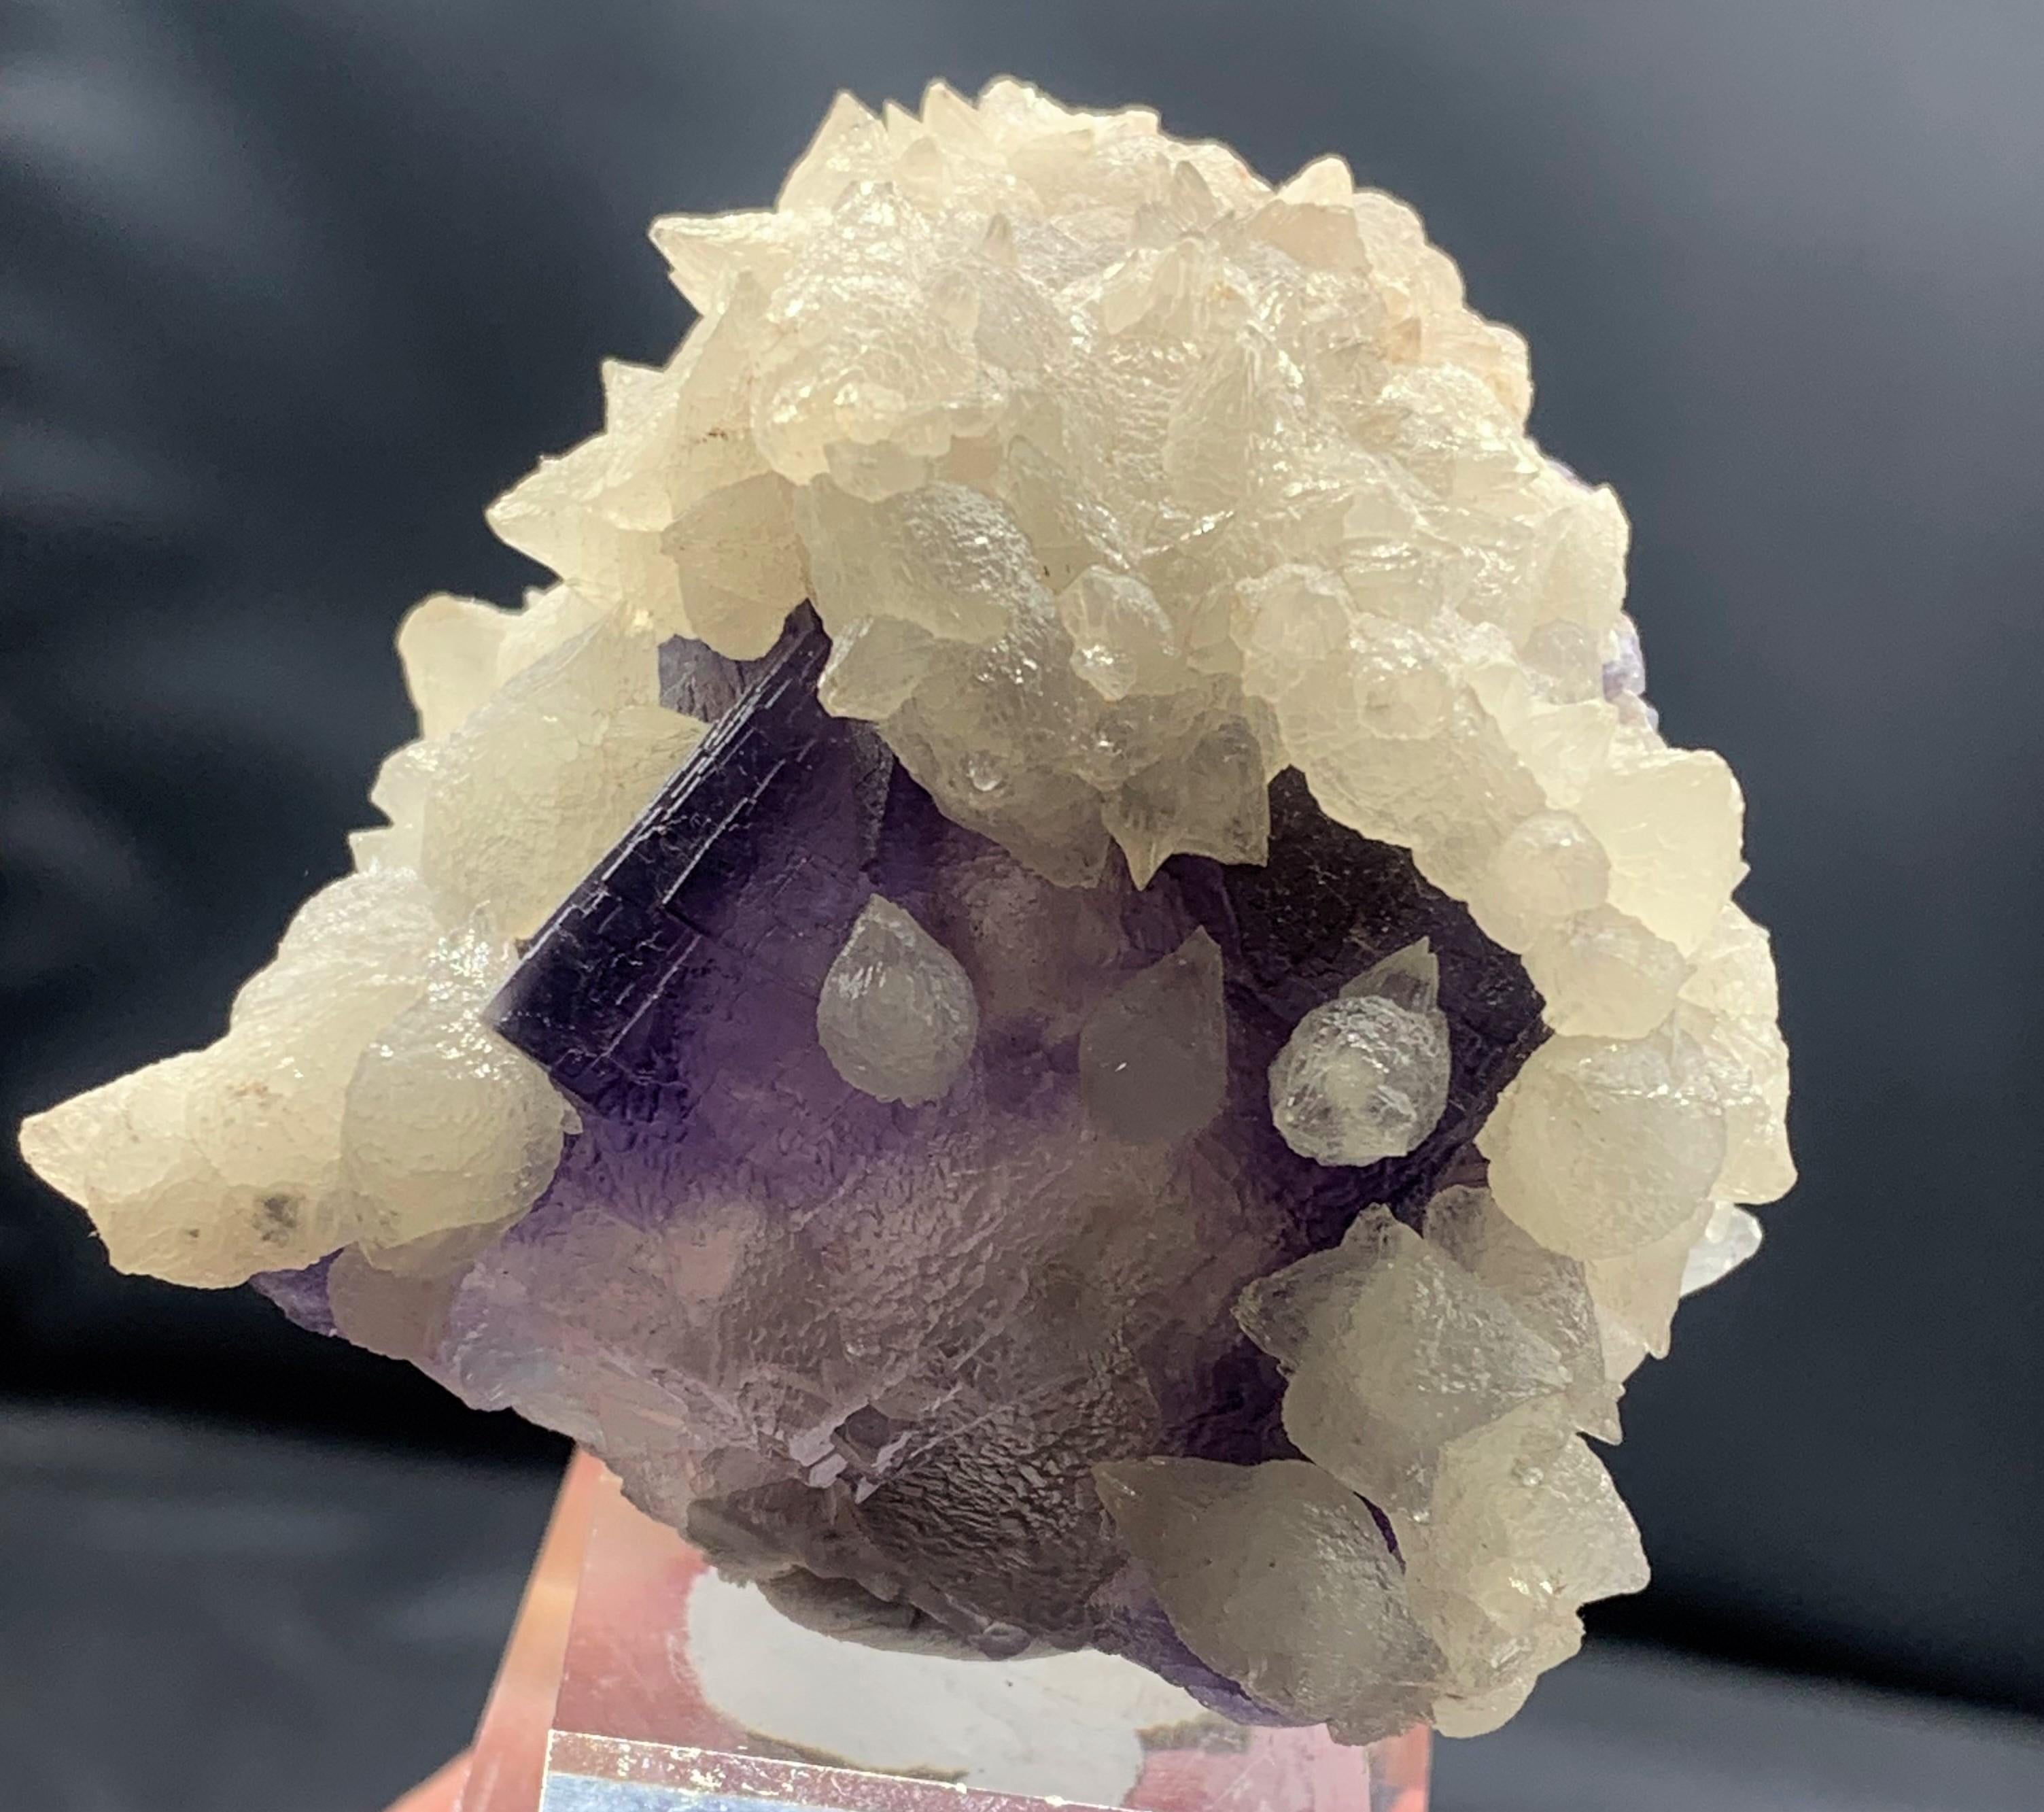 Pakistani Glamorous 162.08 Gram Fluorite Specimen with Dog Tooth from Pakistan  For Sale